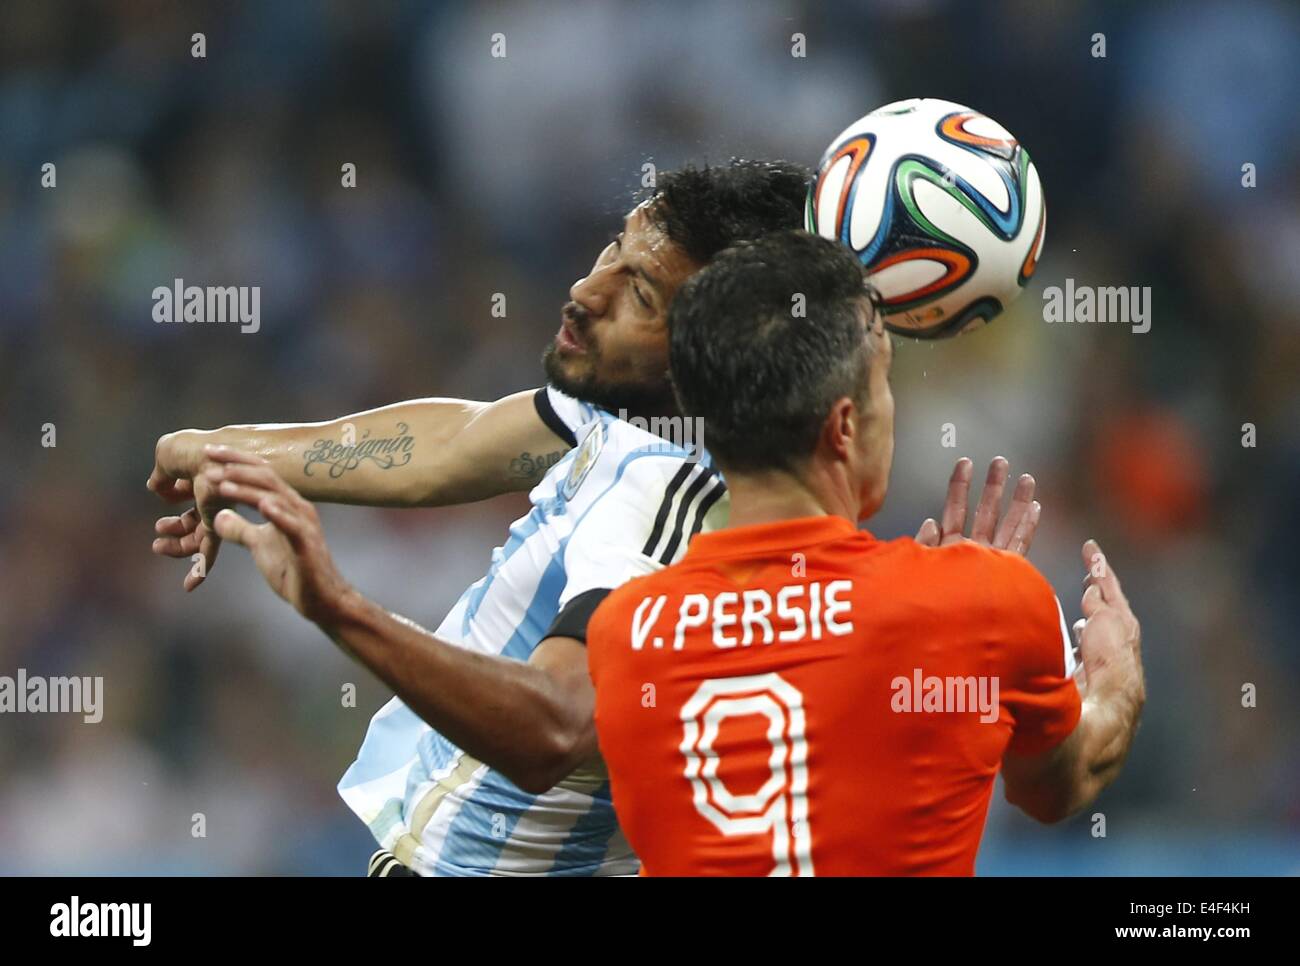 Sao Paulo, Brazil. 9th July, 2014. Argentina's Ezequiel Garay (L) vies with Netherlands' Robin van Persie during a semifinal match between Netherlands and Argentina of 2014 FIFA World Cup at the Arena de Sao Paulo Stadium in Sao Paulo, Brazil, on July 9, 2014. Argentina won 4-2 on penalties over Netherlands after a 0-0 tie and qualified for the final on Wednesday. Credit:  Wang Lili/Xinhua/Alamy Live News Stock Photo